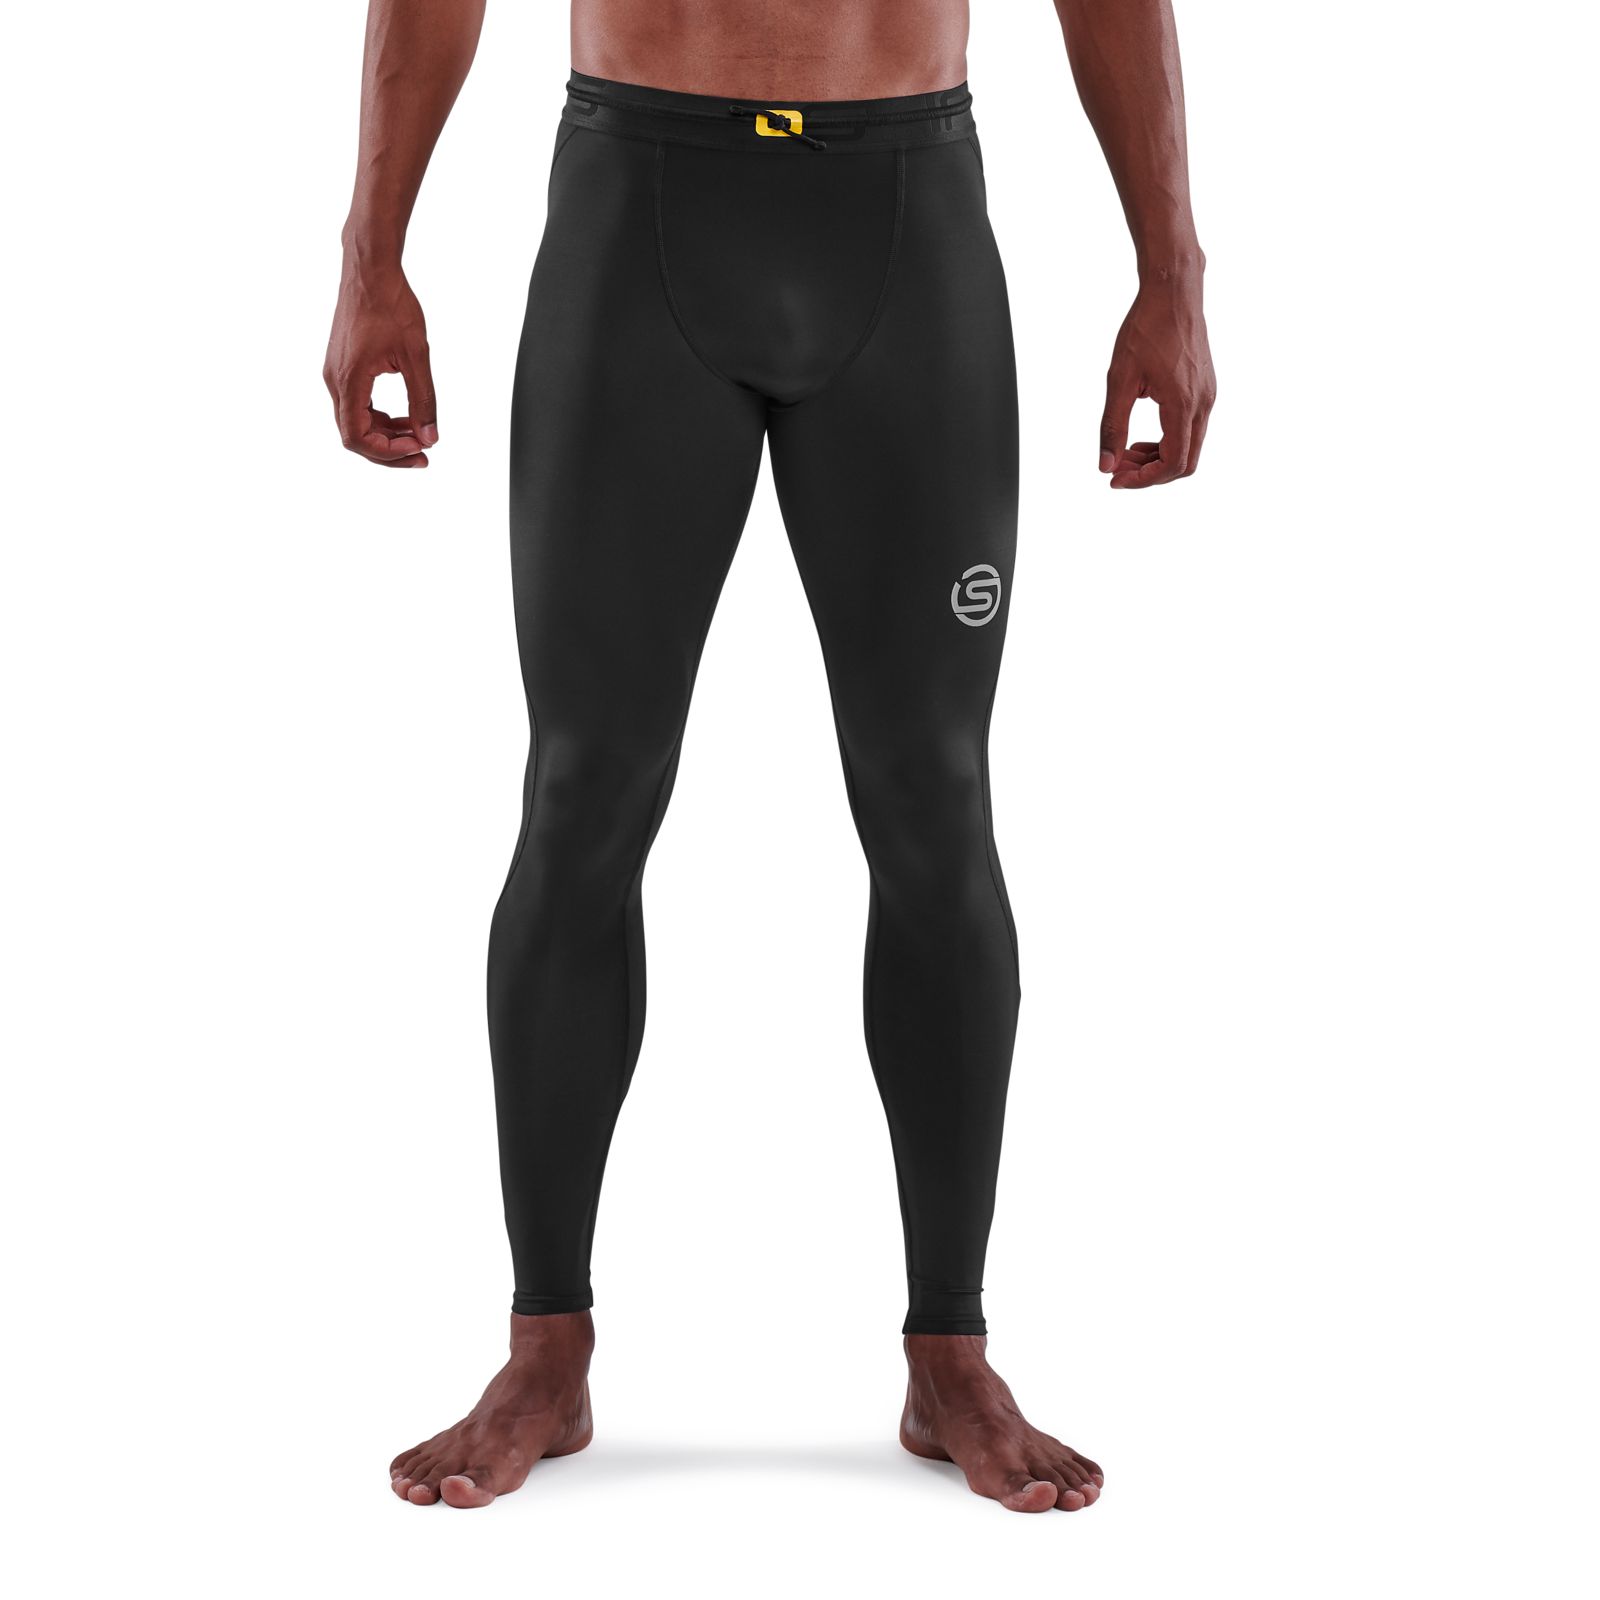 Buy NEVER LOSE Men's Compression Ultima T-Shirt Top Skin Tights